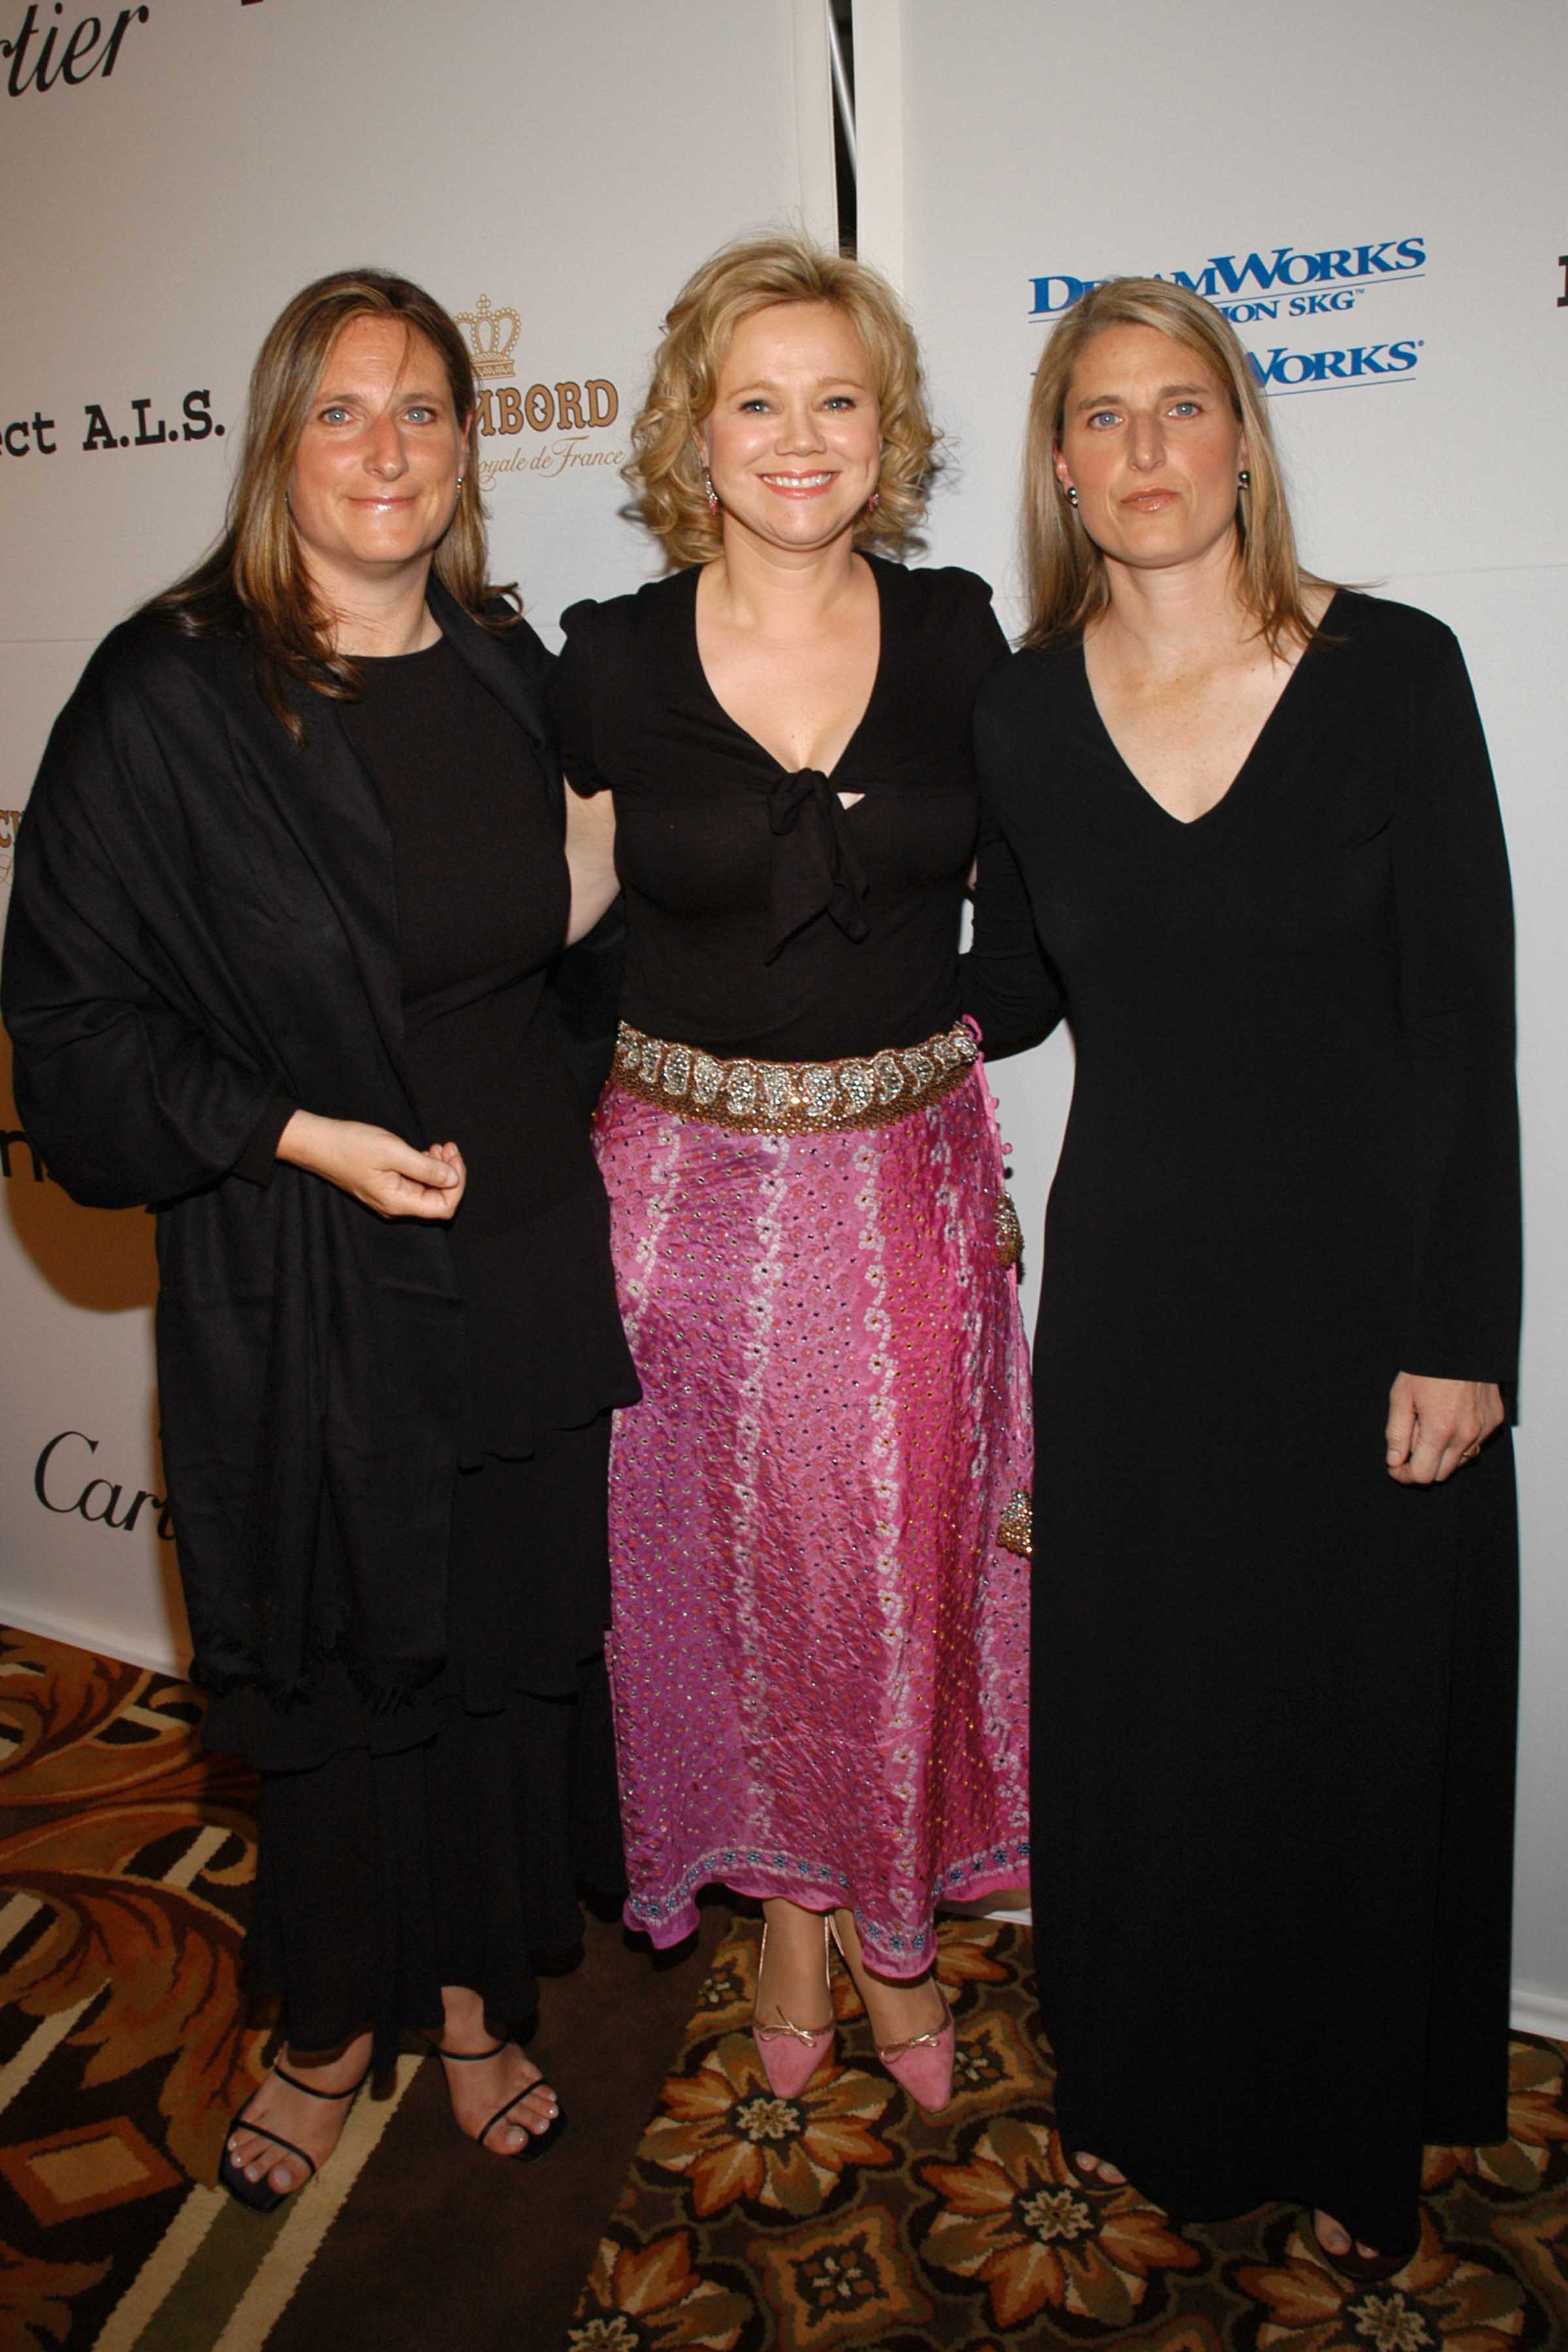 Meredith Estess, Gina Kimmel, and Caroline Rhea at the Annual Project A.L.S. Gala honoring Ben Stiller at Westin Century Plaza Hotel & Spa on May 6, 2005, in Los Angeles, California. | Source: Getty Images